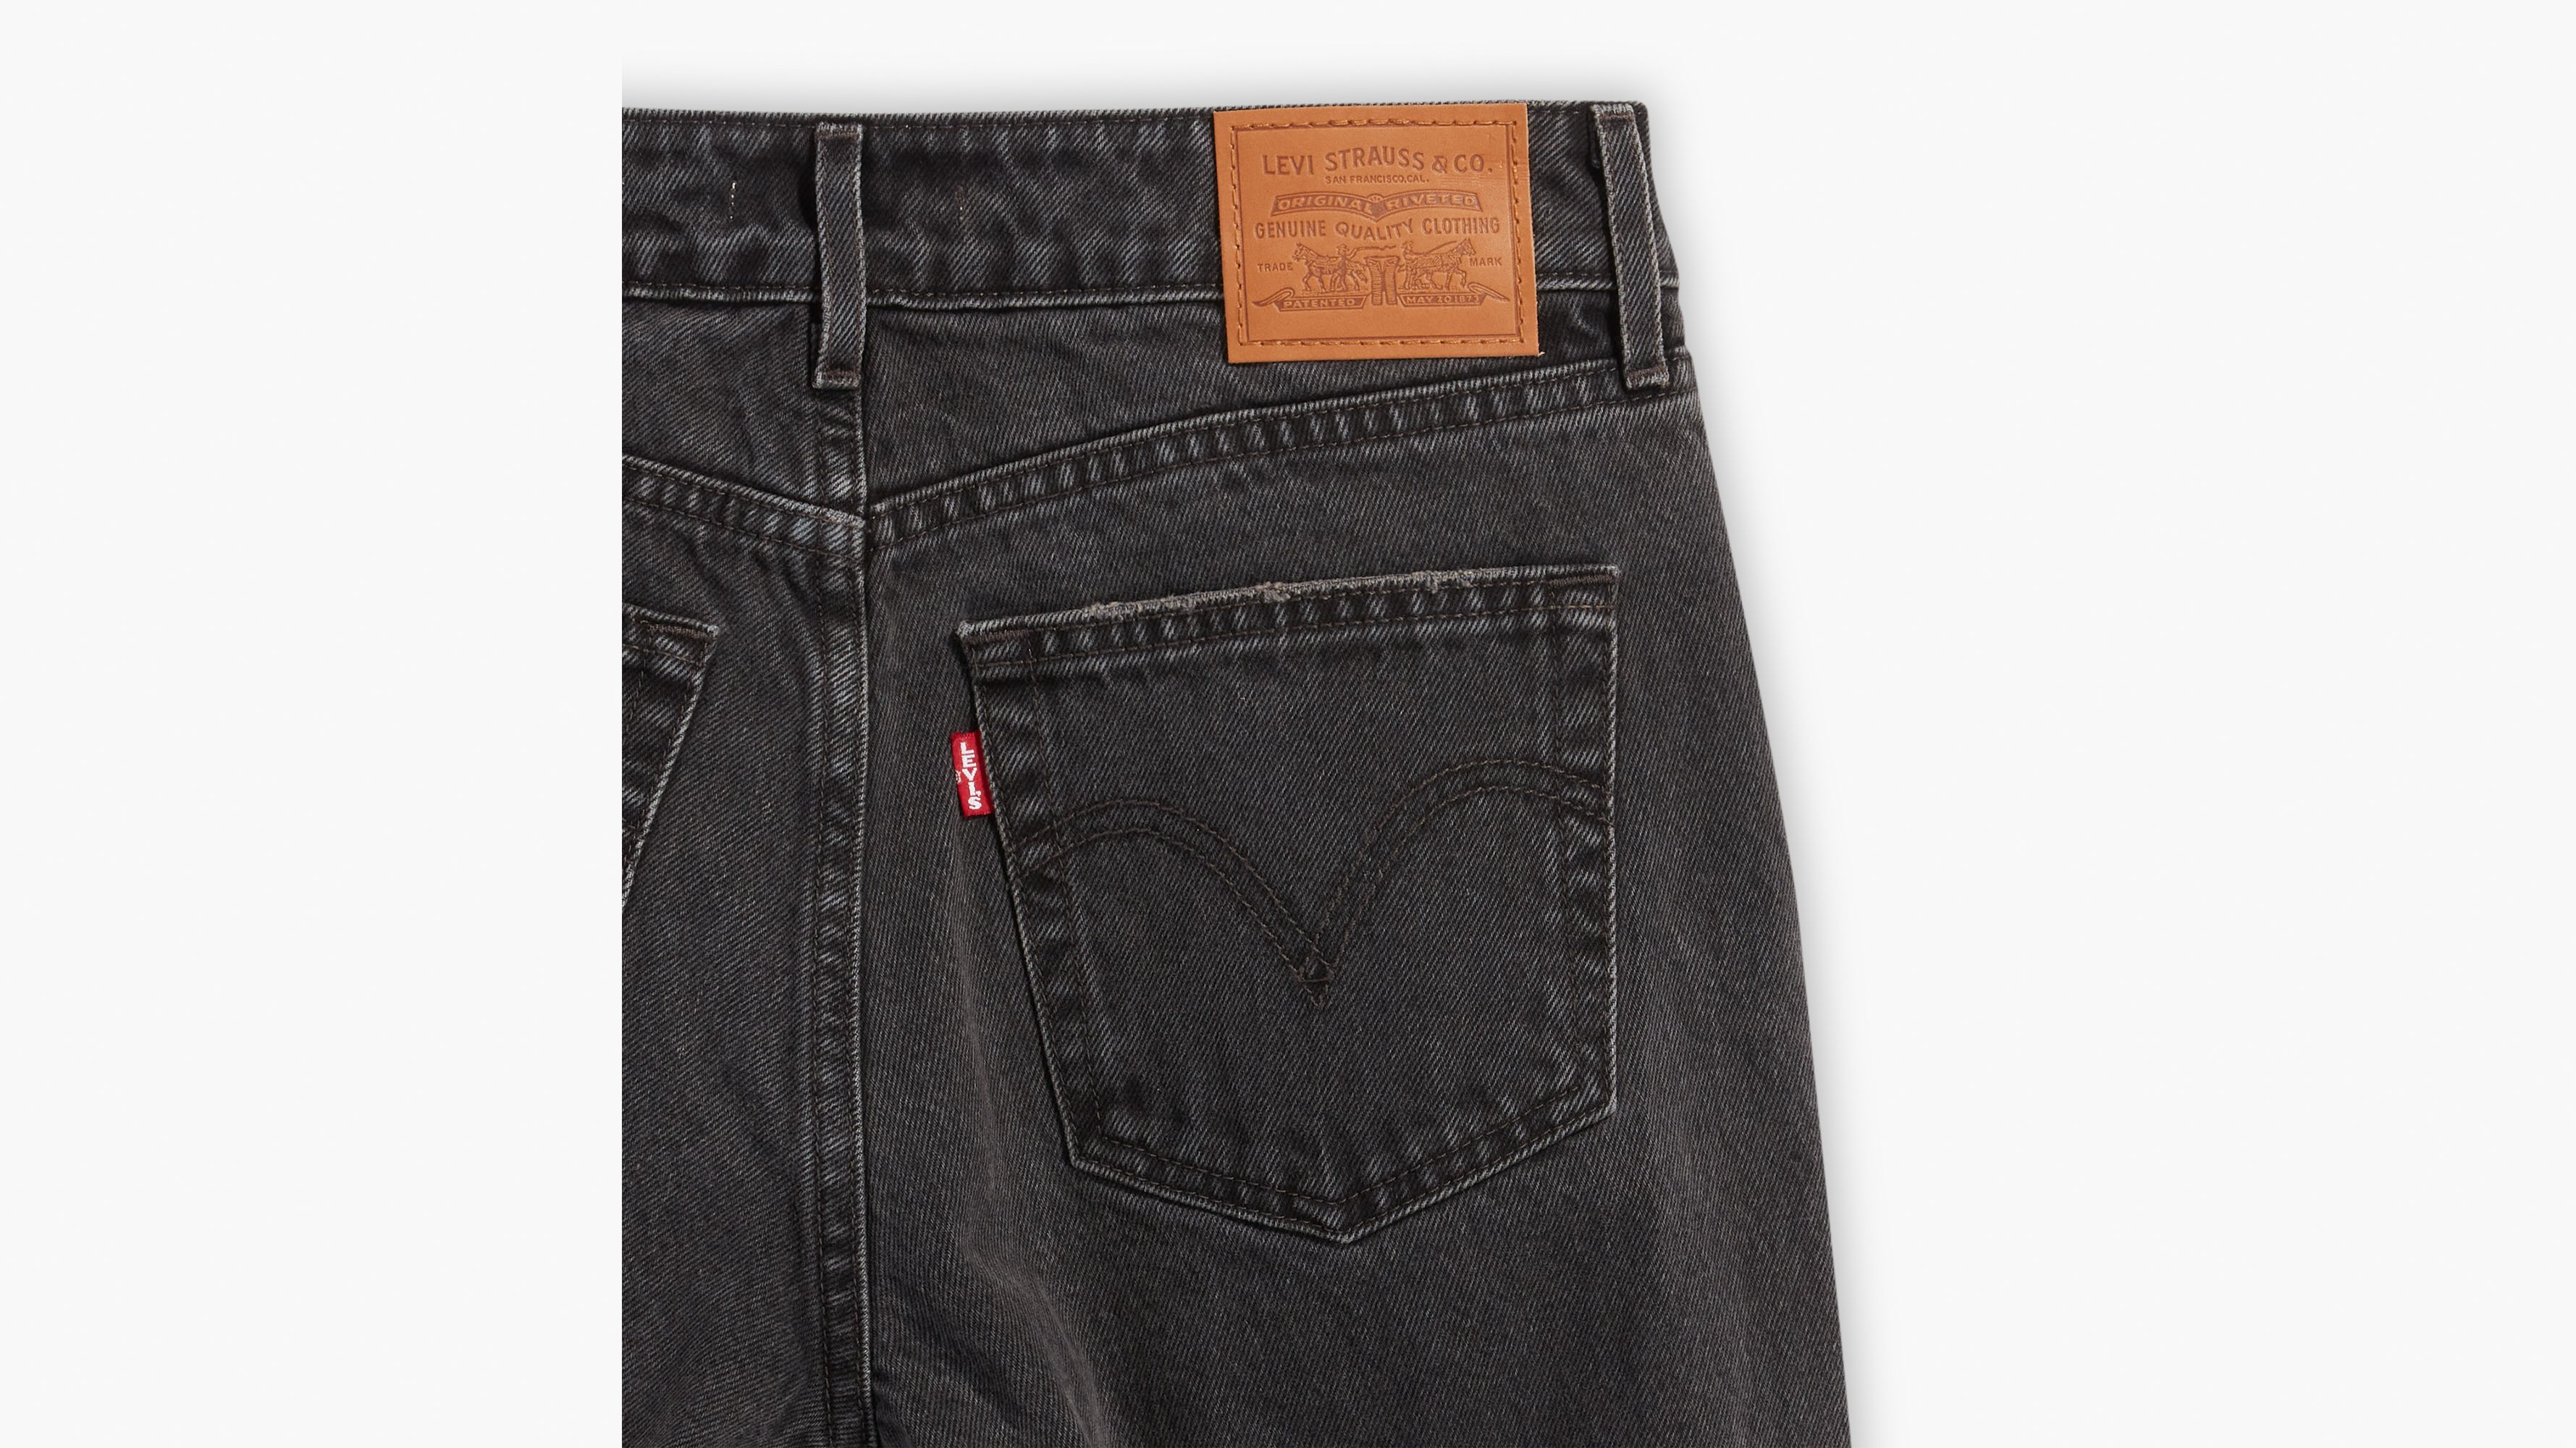 Levi's Stay Loose Denim Jeans - Weedless Hook Black, Levi's Stay Loose  Denim Jeans, Buy Jeans